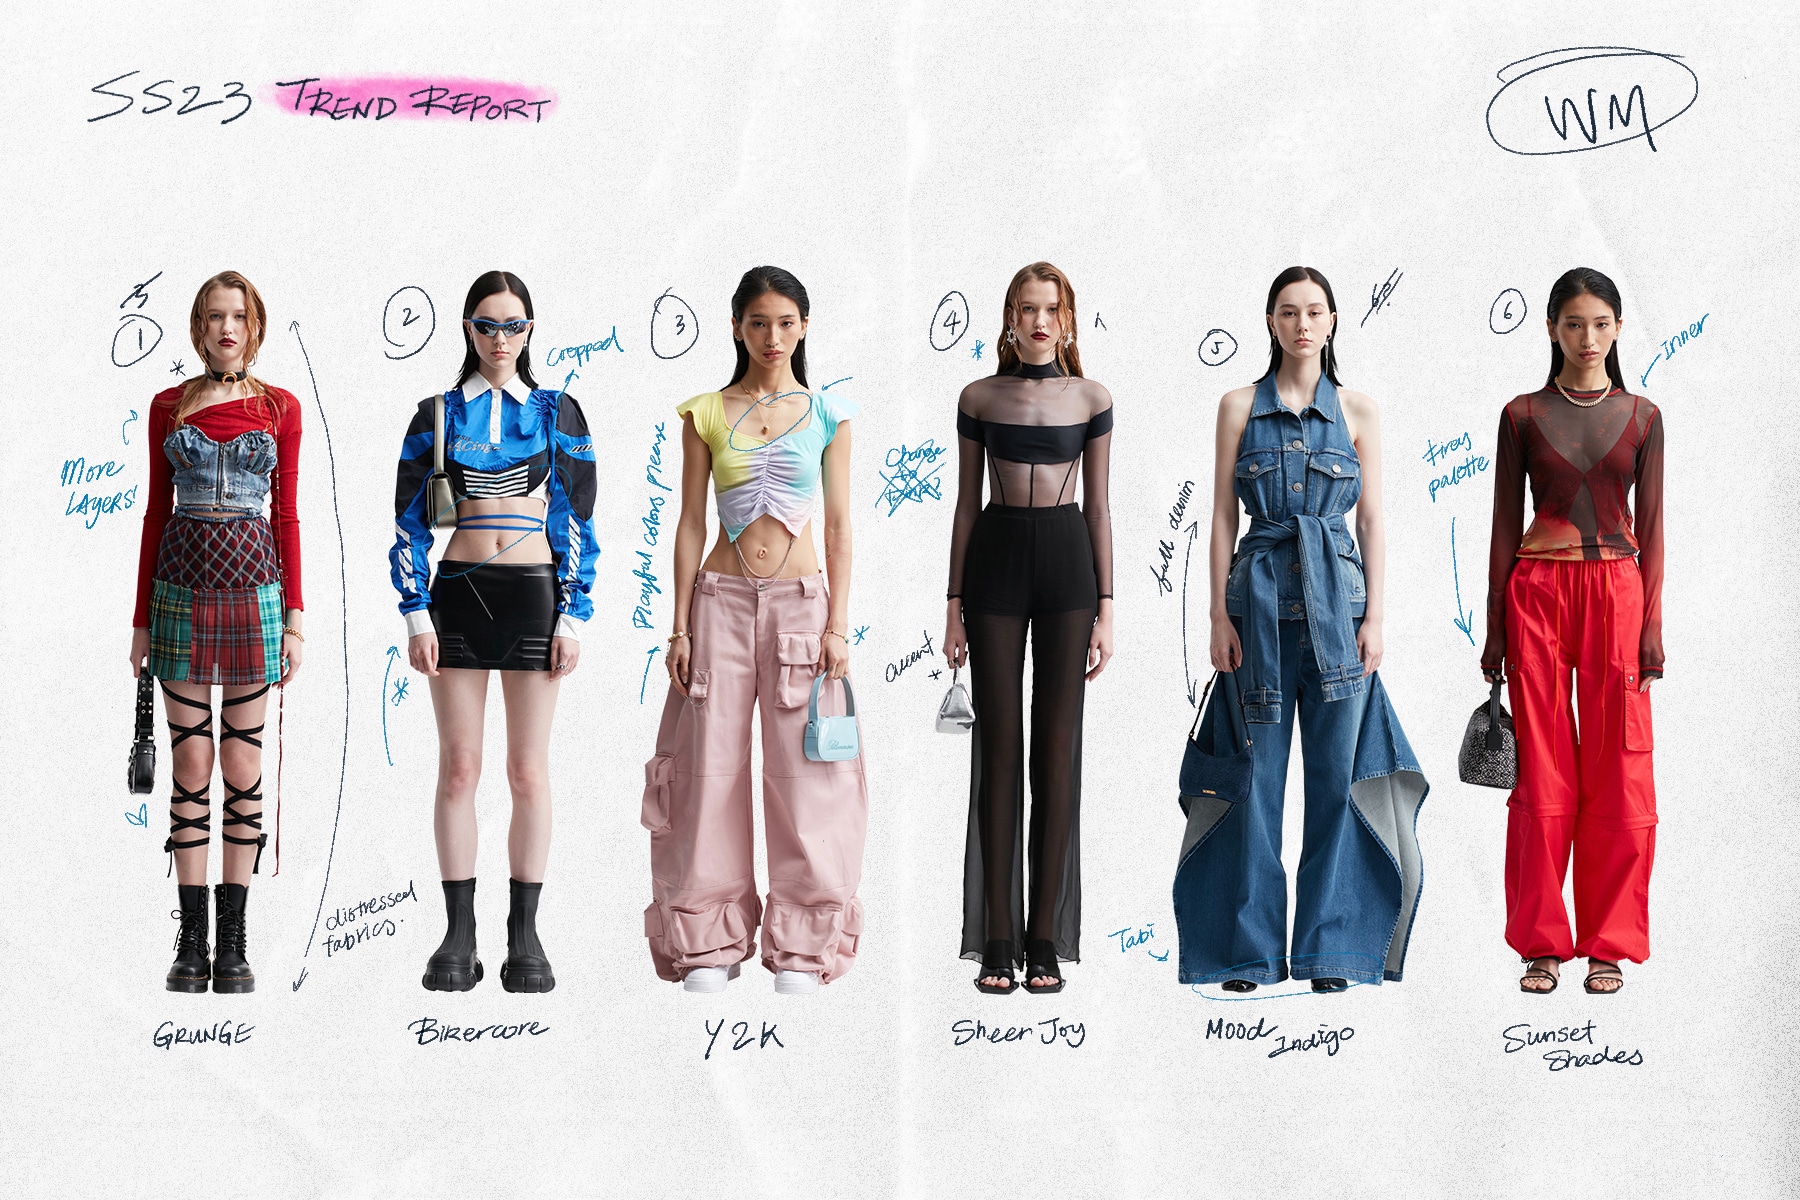 Fashion Trends Seen On Spring 2021 Runways - Portugal Textile